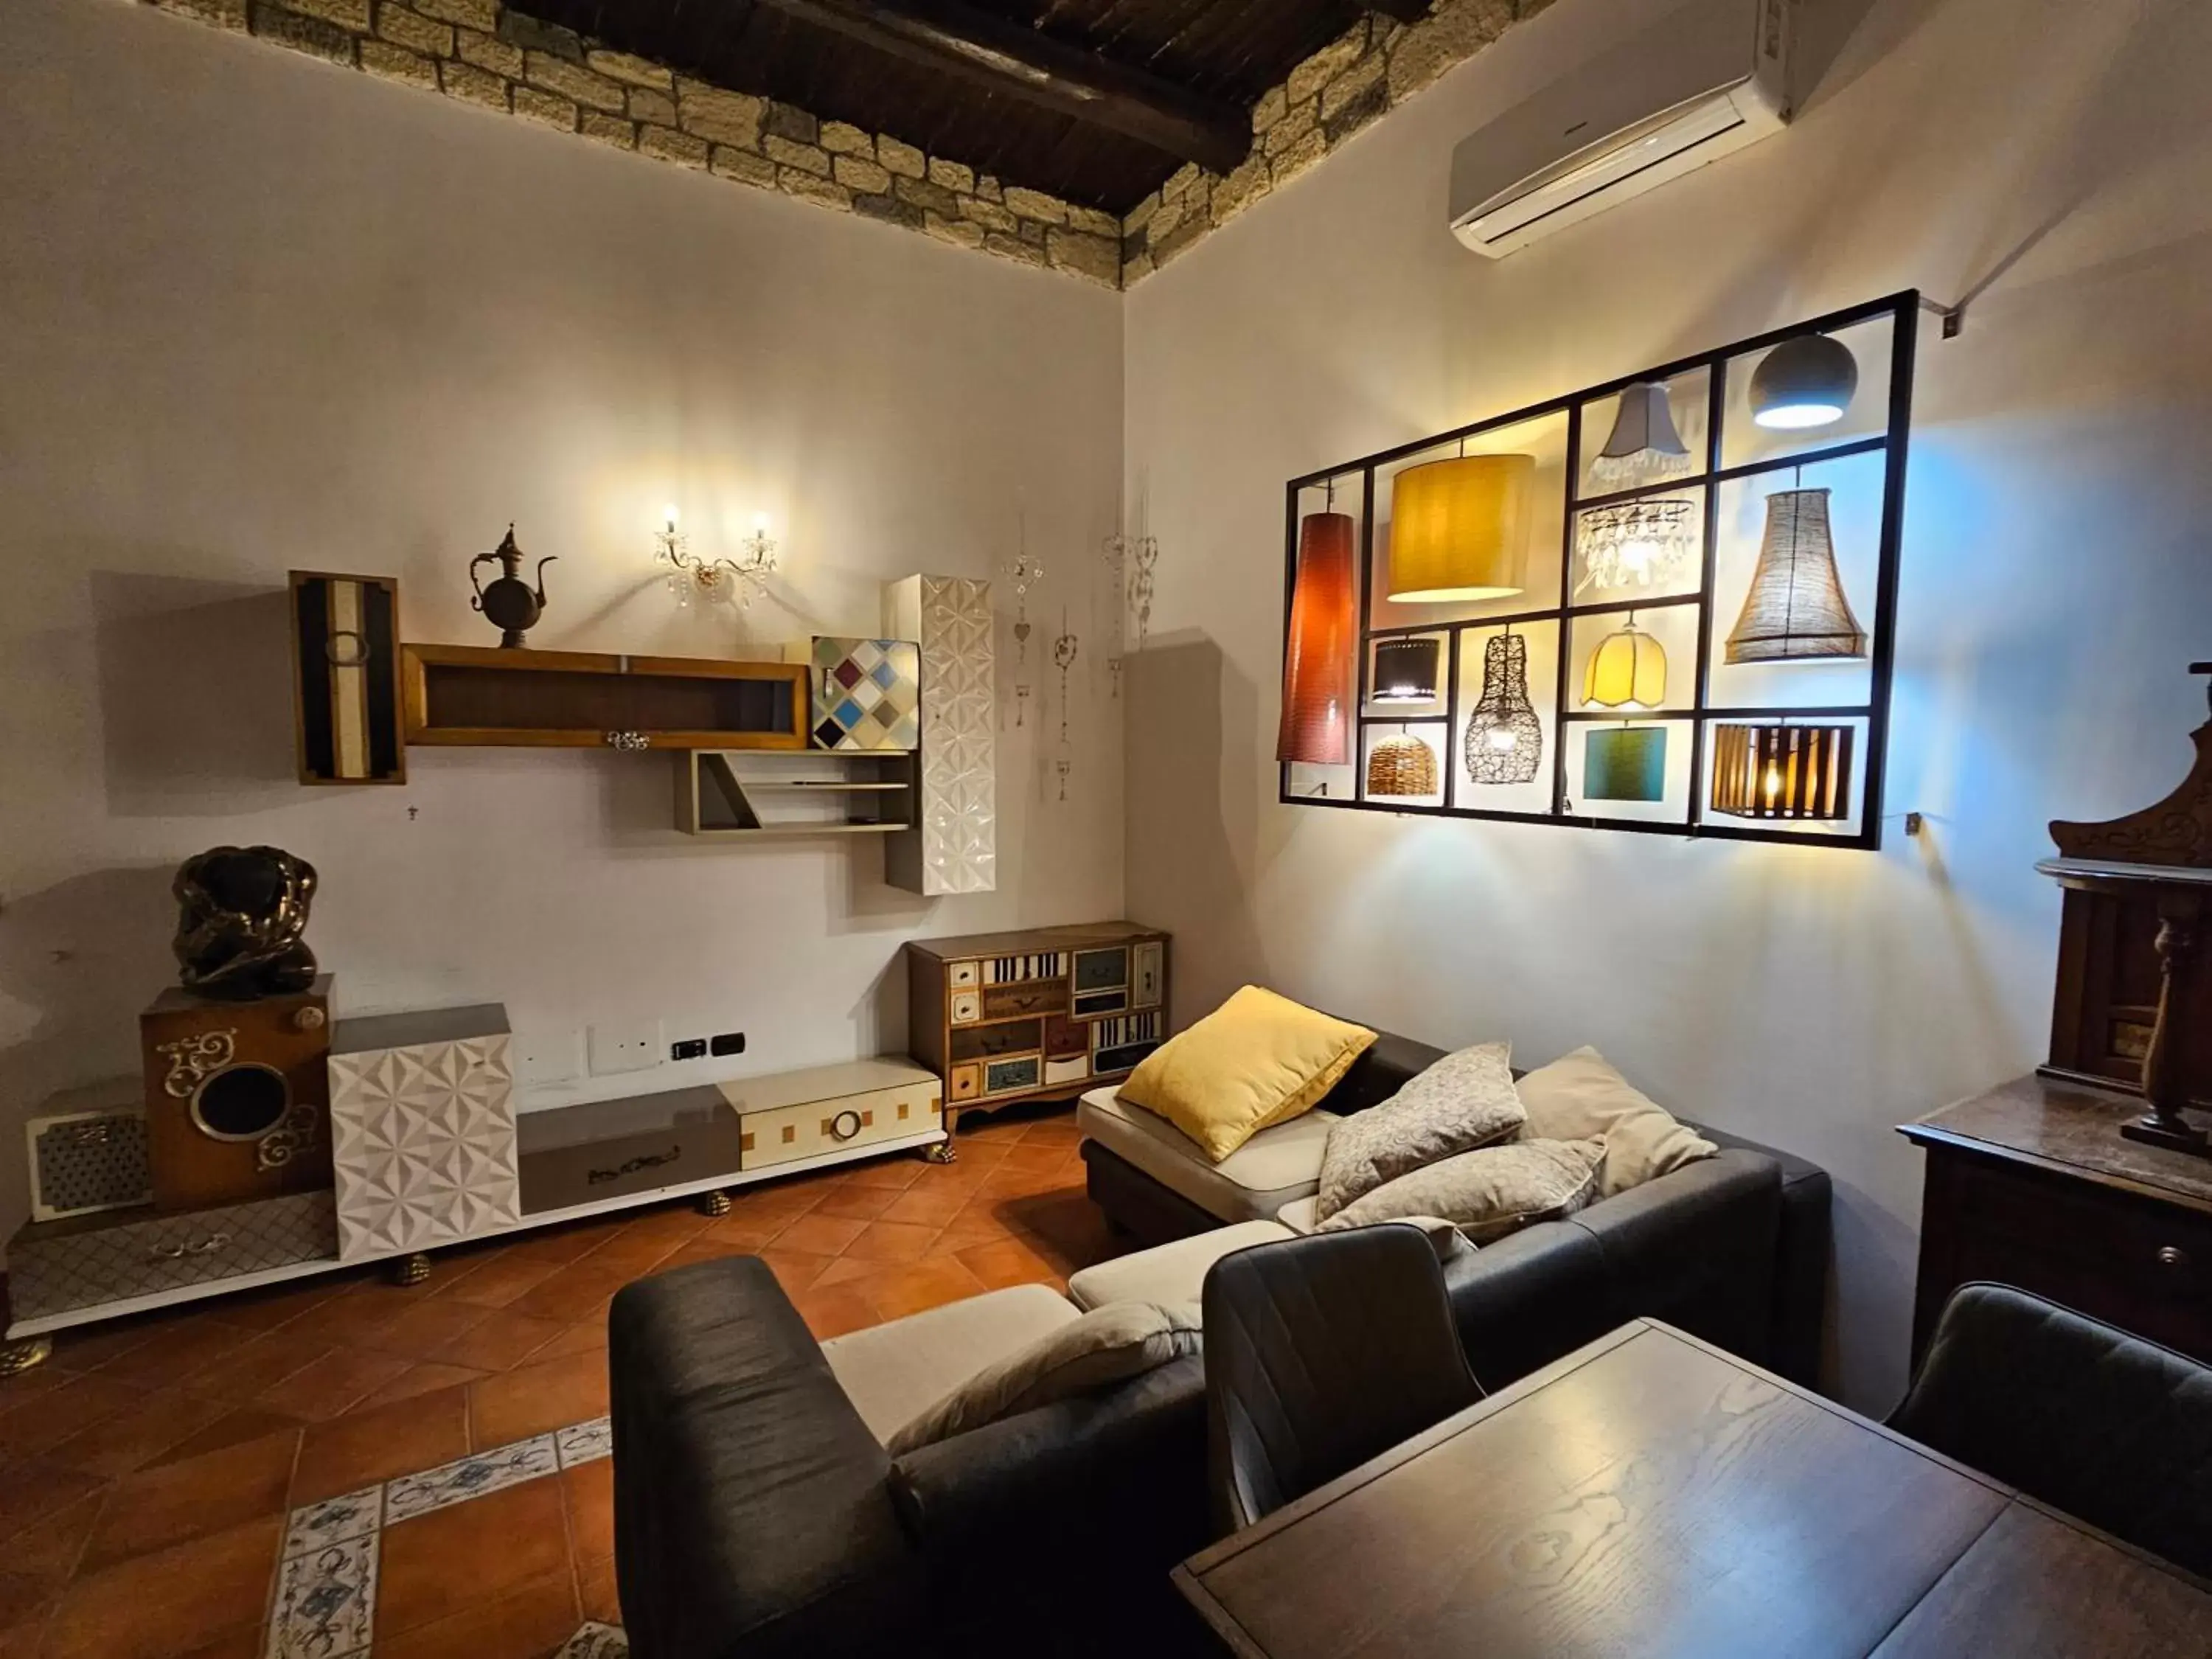 Apartment - Ground Floor in Spanish Palace Rooms, Suites Apartments & Terraces